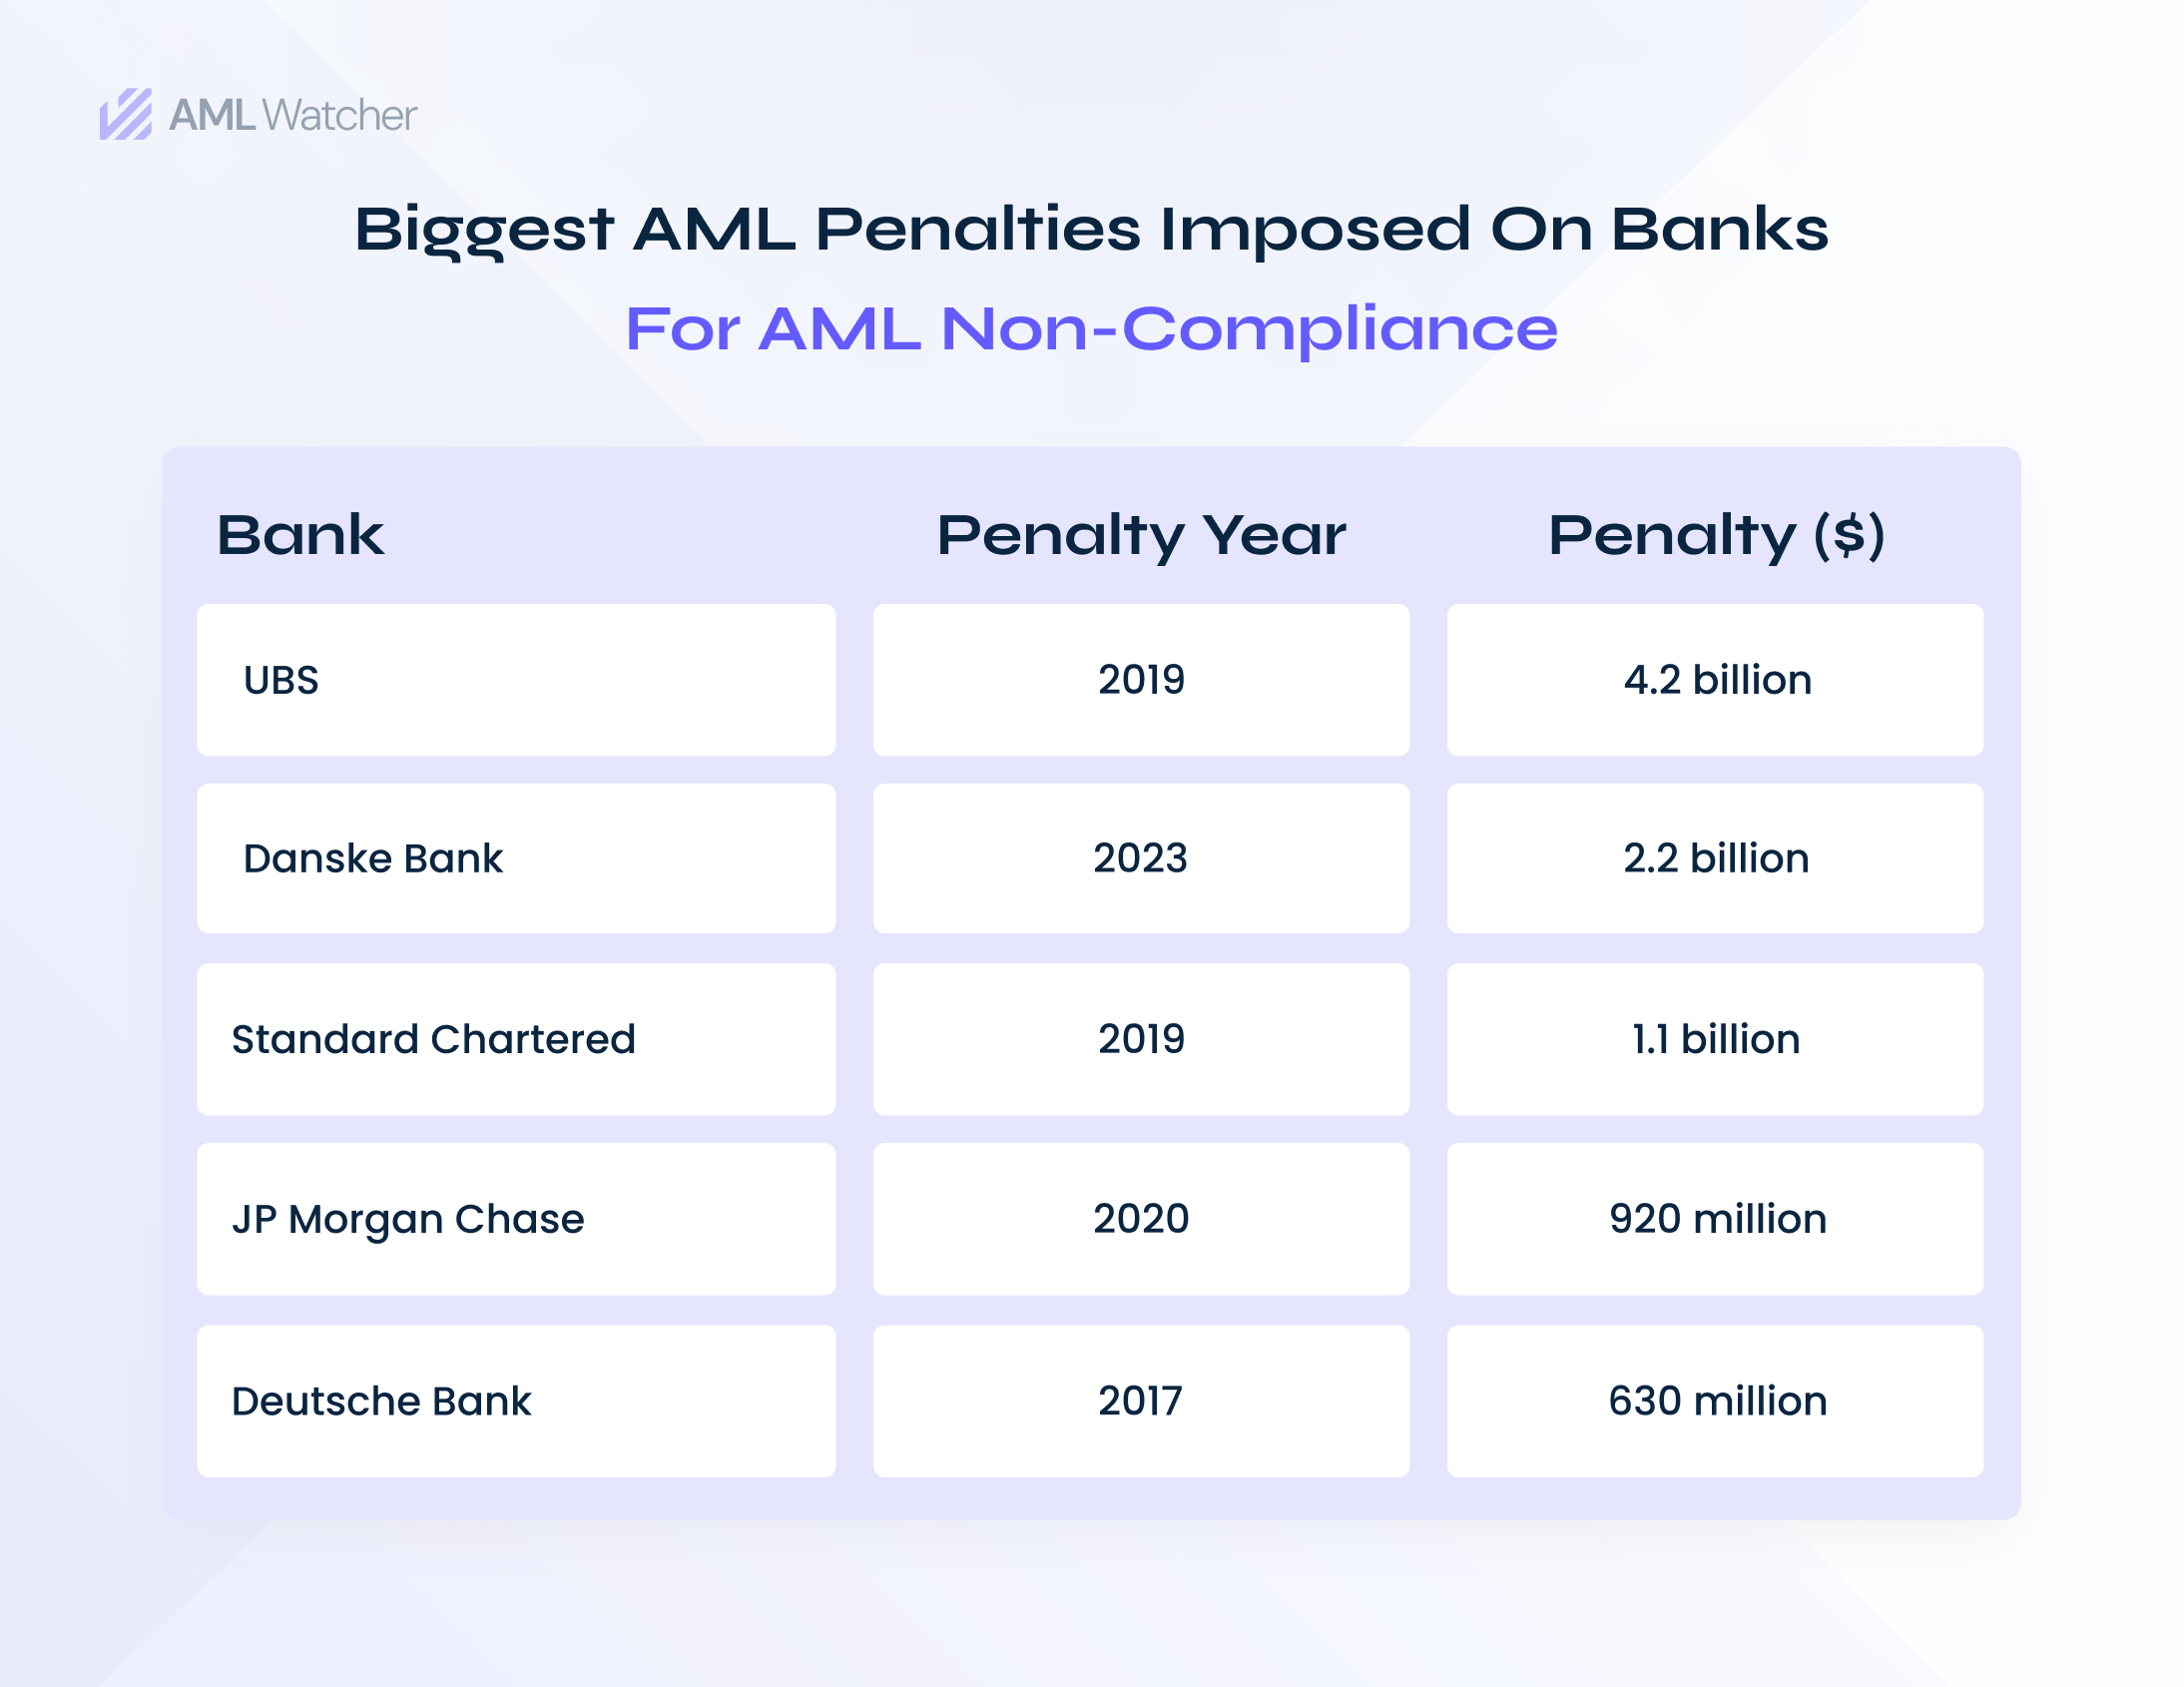 A list of banks who were penalized with monetary fines and legal consequences because their AML framework was too weak to cater evolving compliance needs.